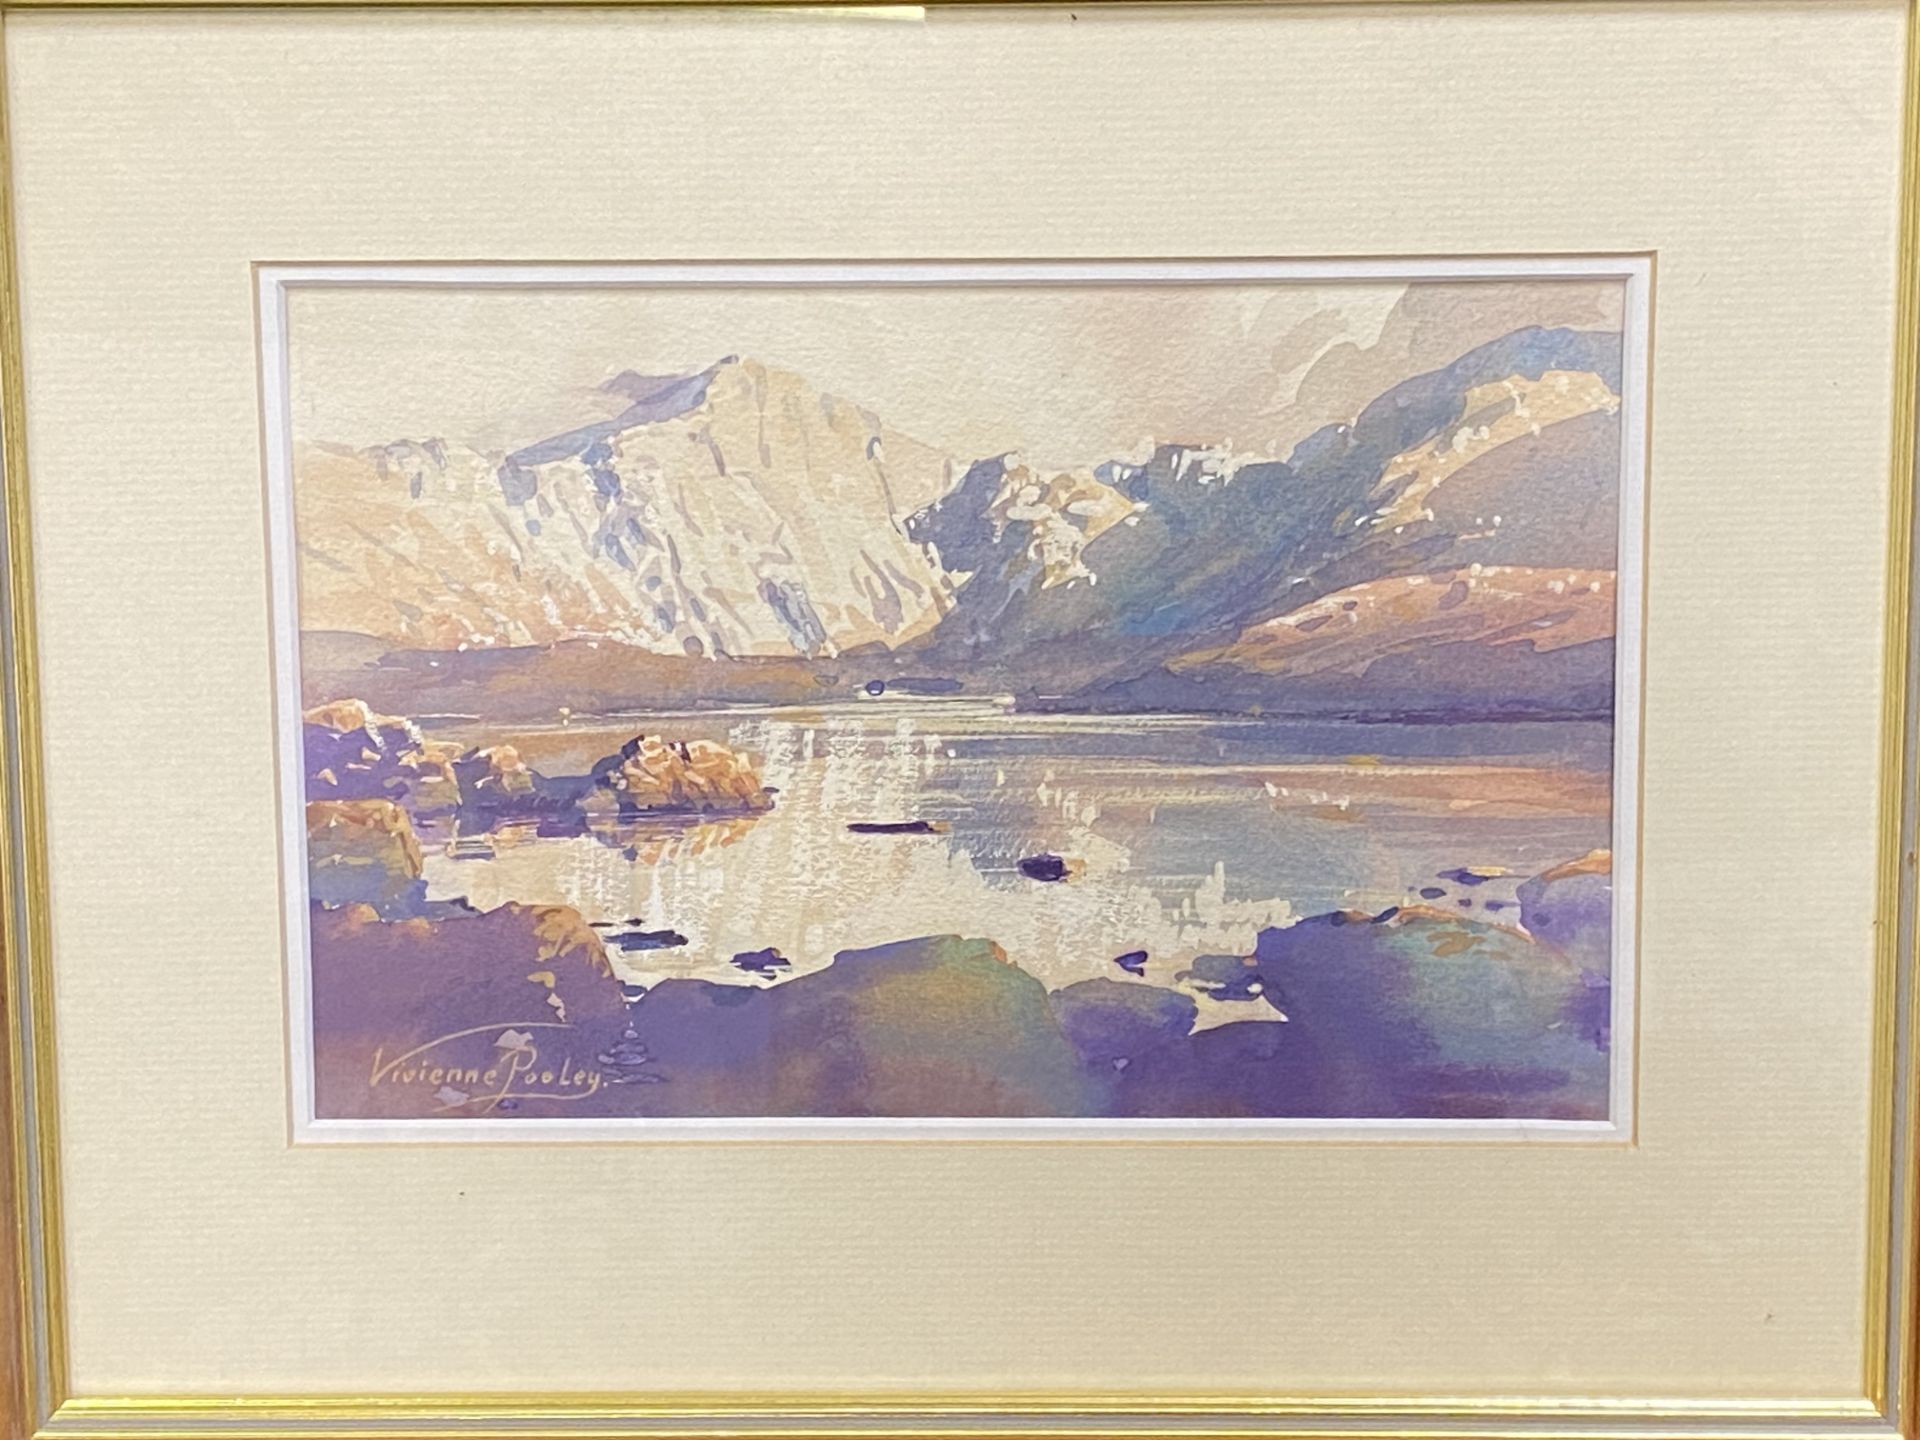 Framed and glazed watercolour of a lake - Image 2 of 4